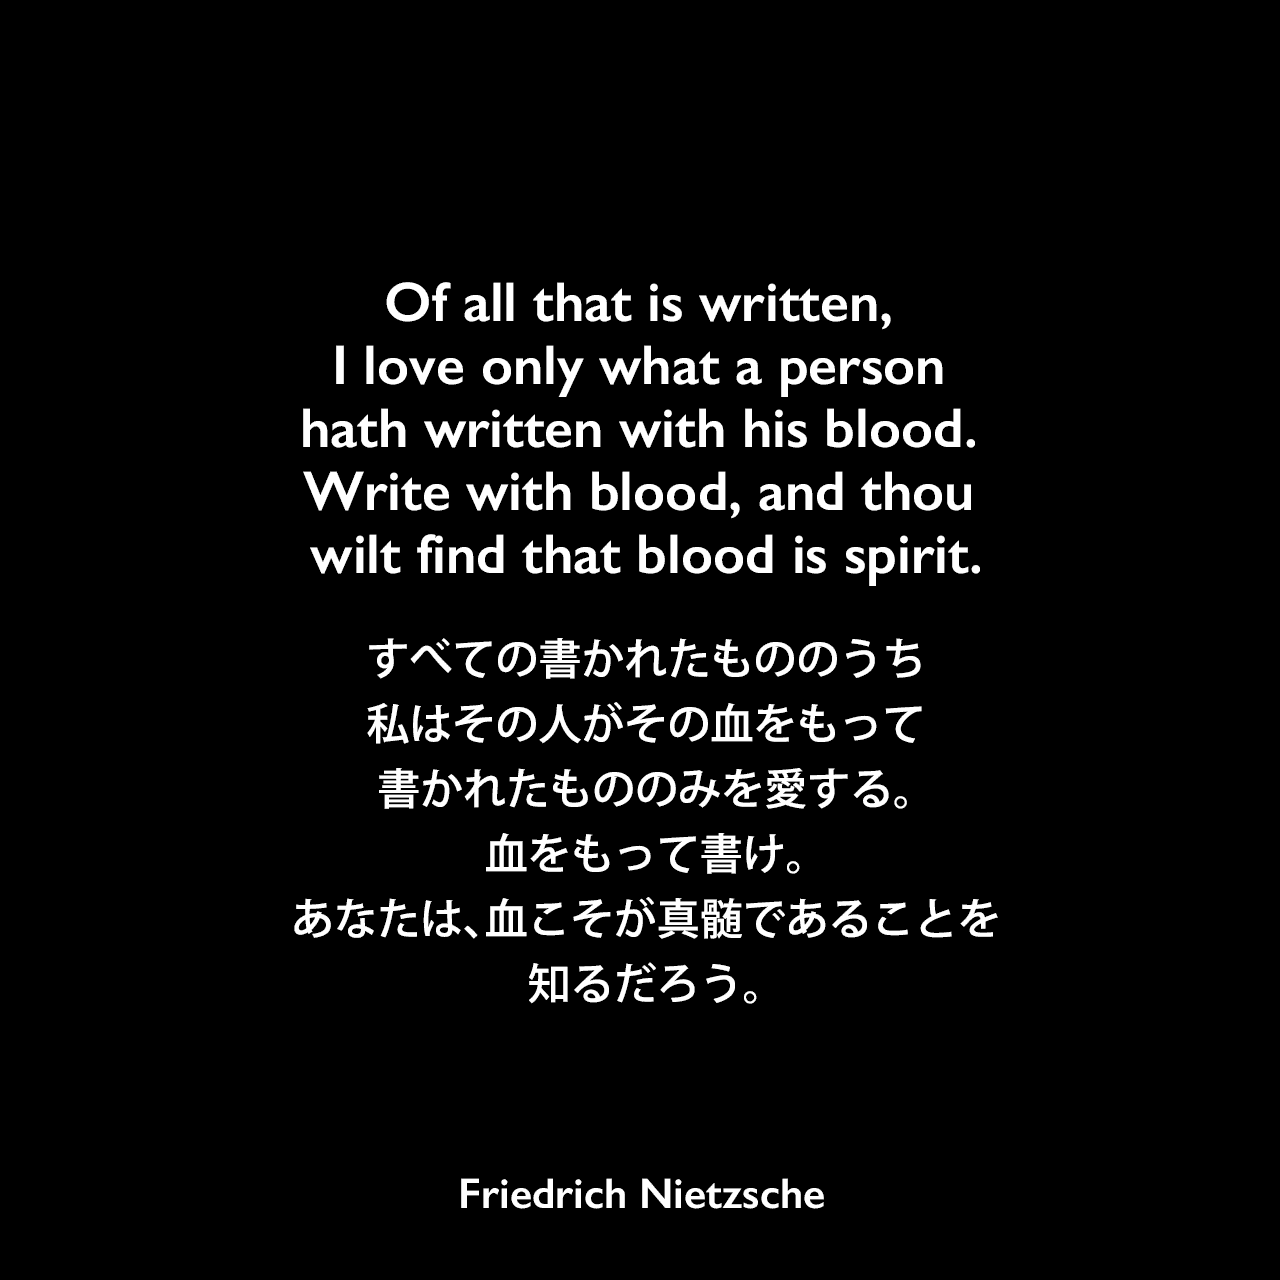 Of all that is written, I love only what a person hath written with his blood. Write with blood, and thou wilt find that blood is spirit.すべての書かれたもののうち、私はその人がその血をもって書かれたもののみを愛する。血をもって書け。あなたは、血こそが真髄であることを知るだろう。- ニーチェの本「ツァラトゥストラはこう語った」よりFriedrich Nietzsche